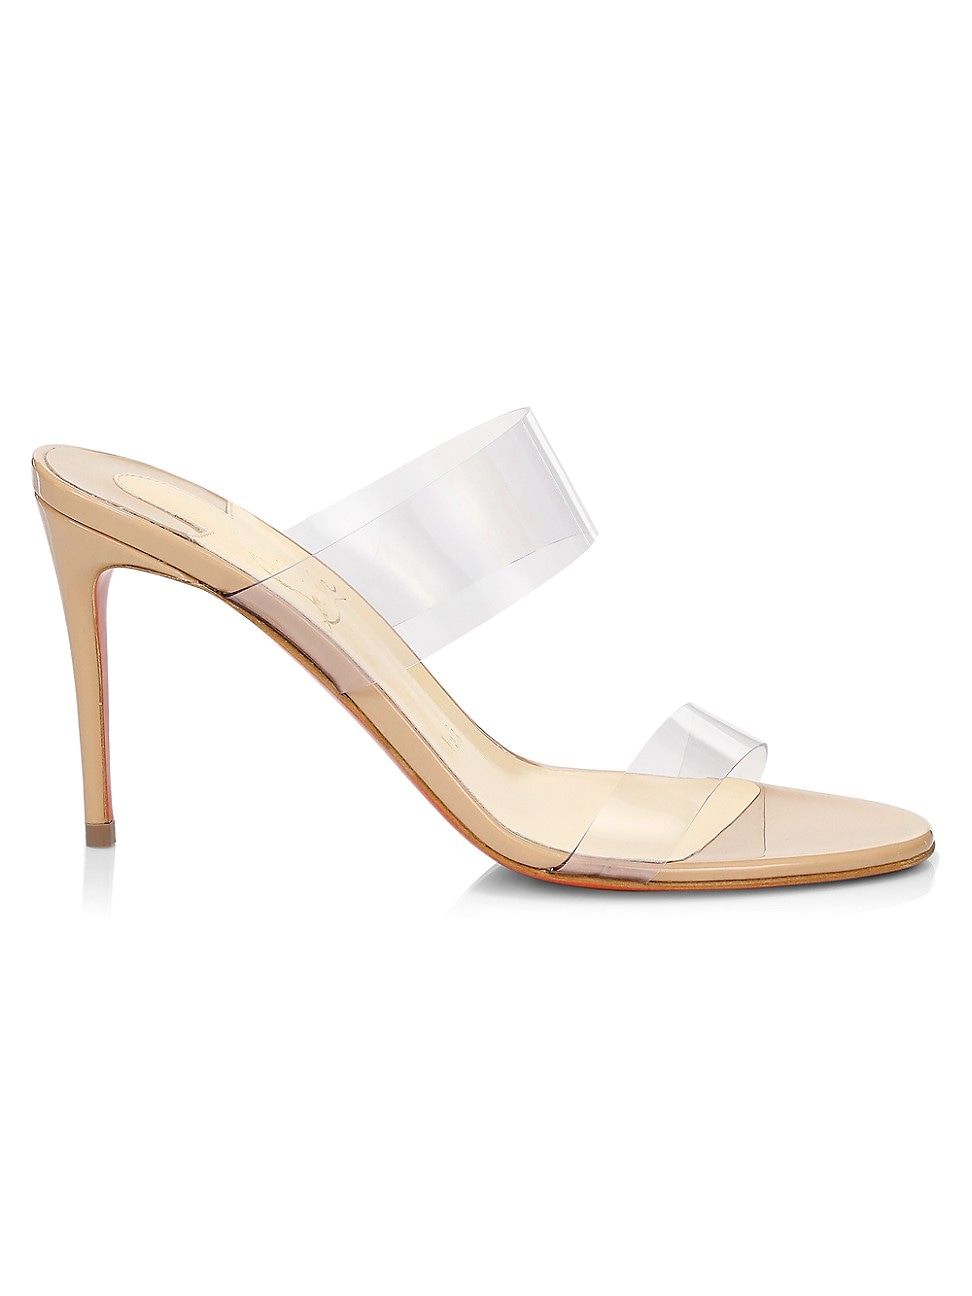 Christian Louboutin Just Nothing PVC & Patent Leather Mules | Saks Fifth Avenue